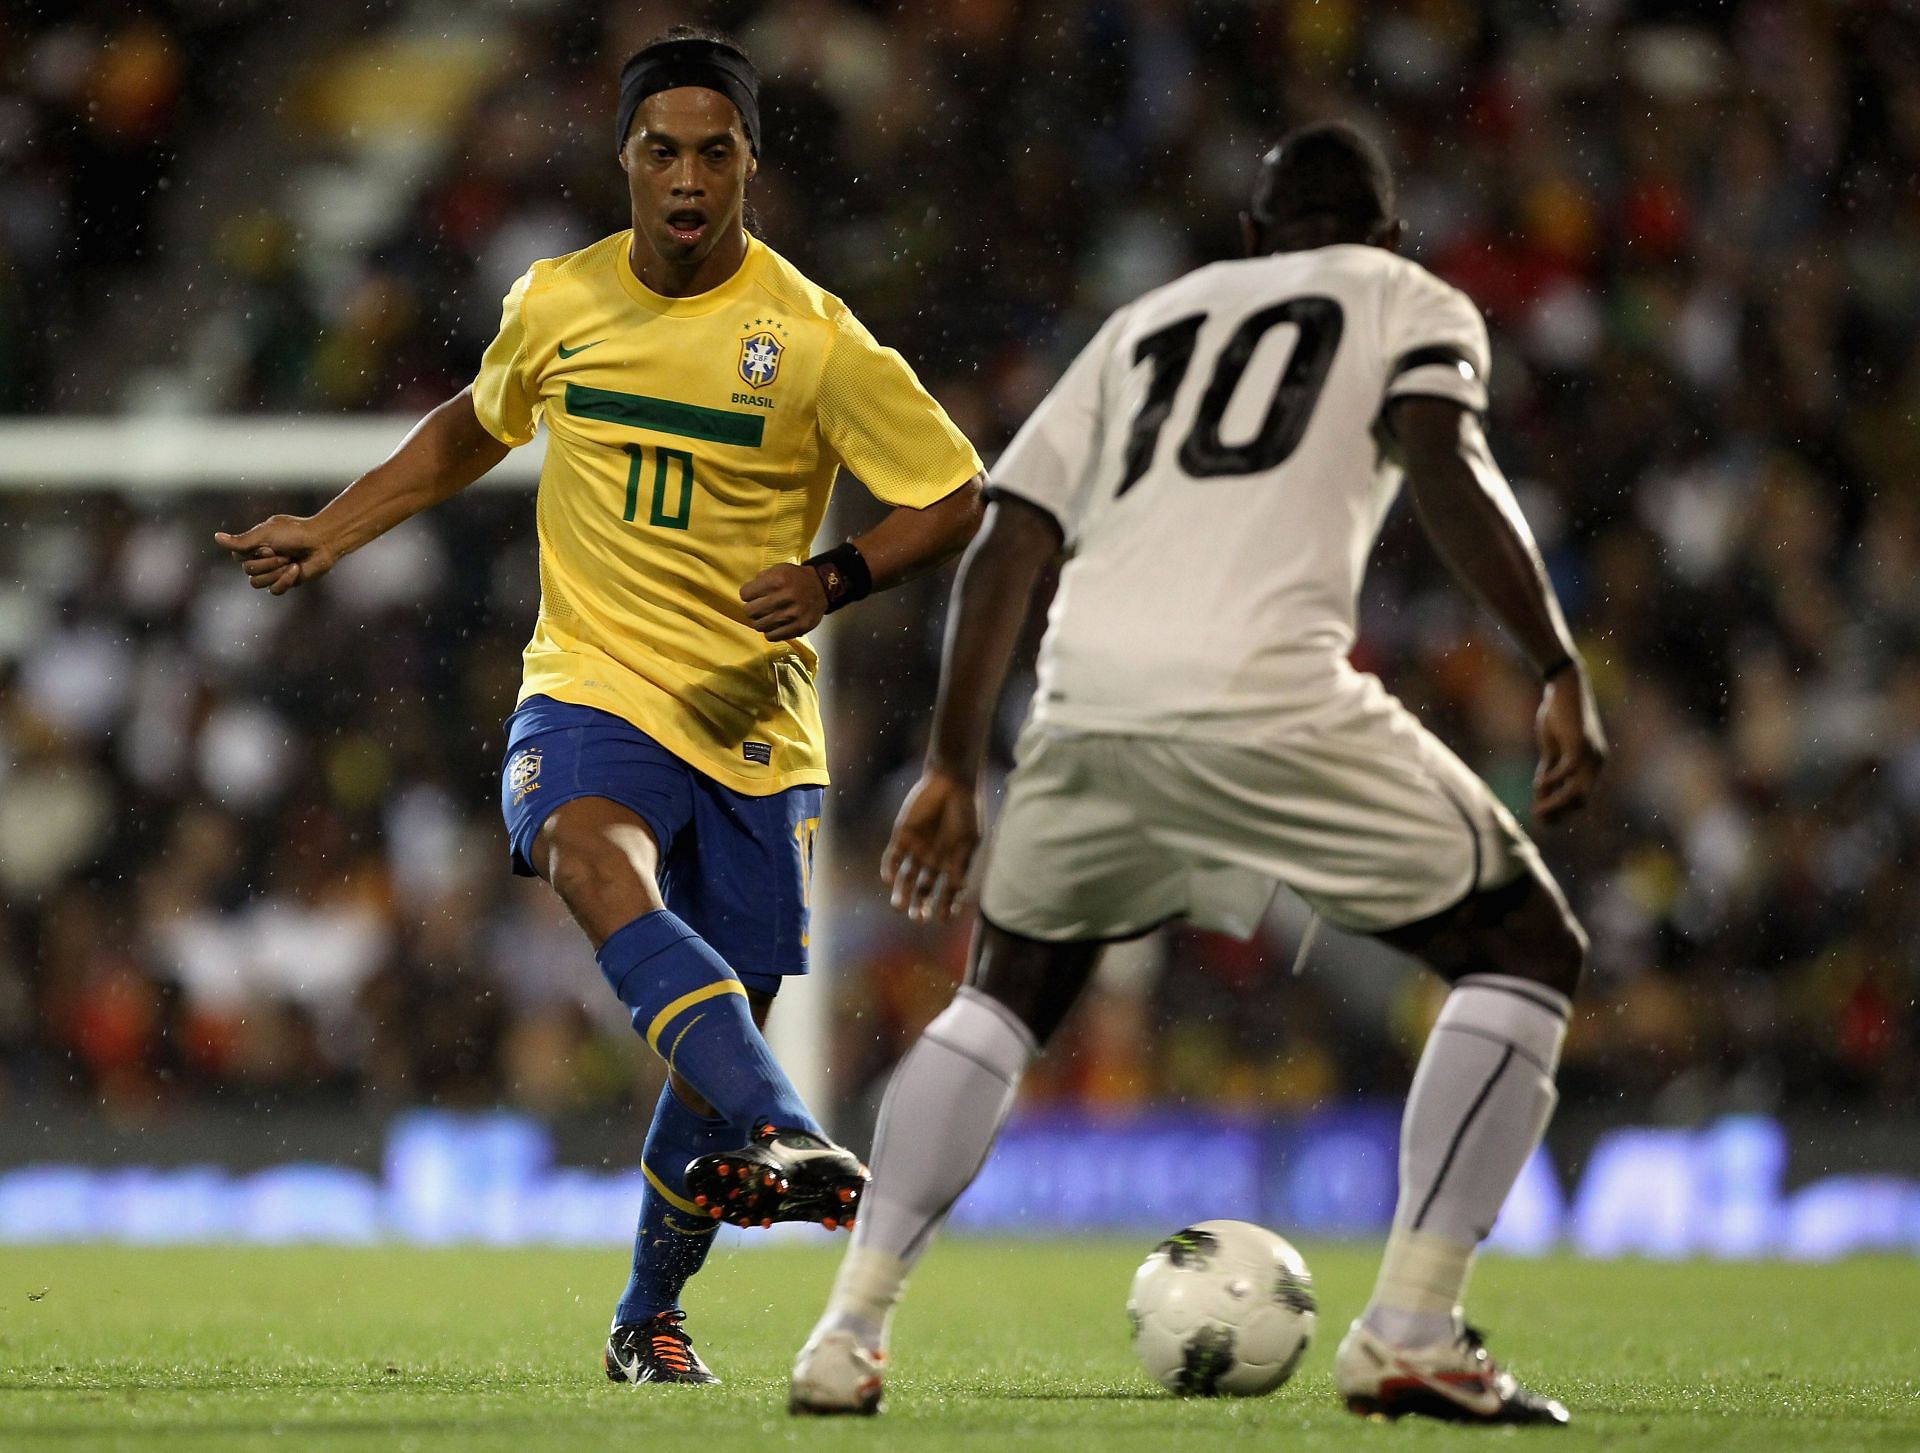 Ronnie in action for Brazil against Germany in 2011